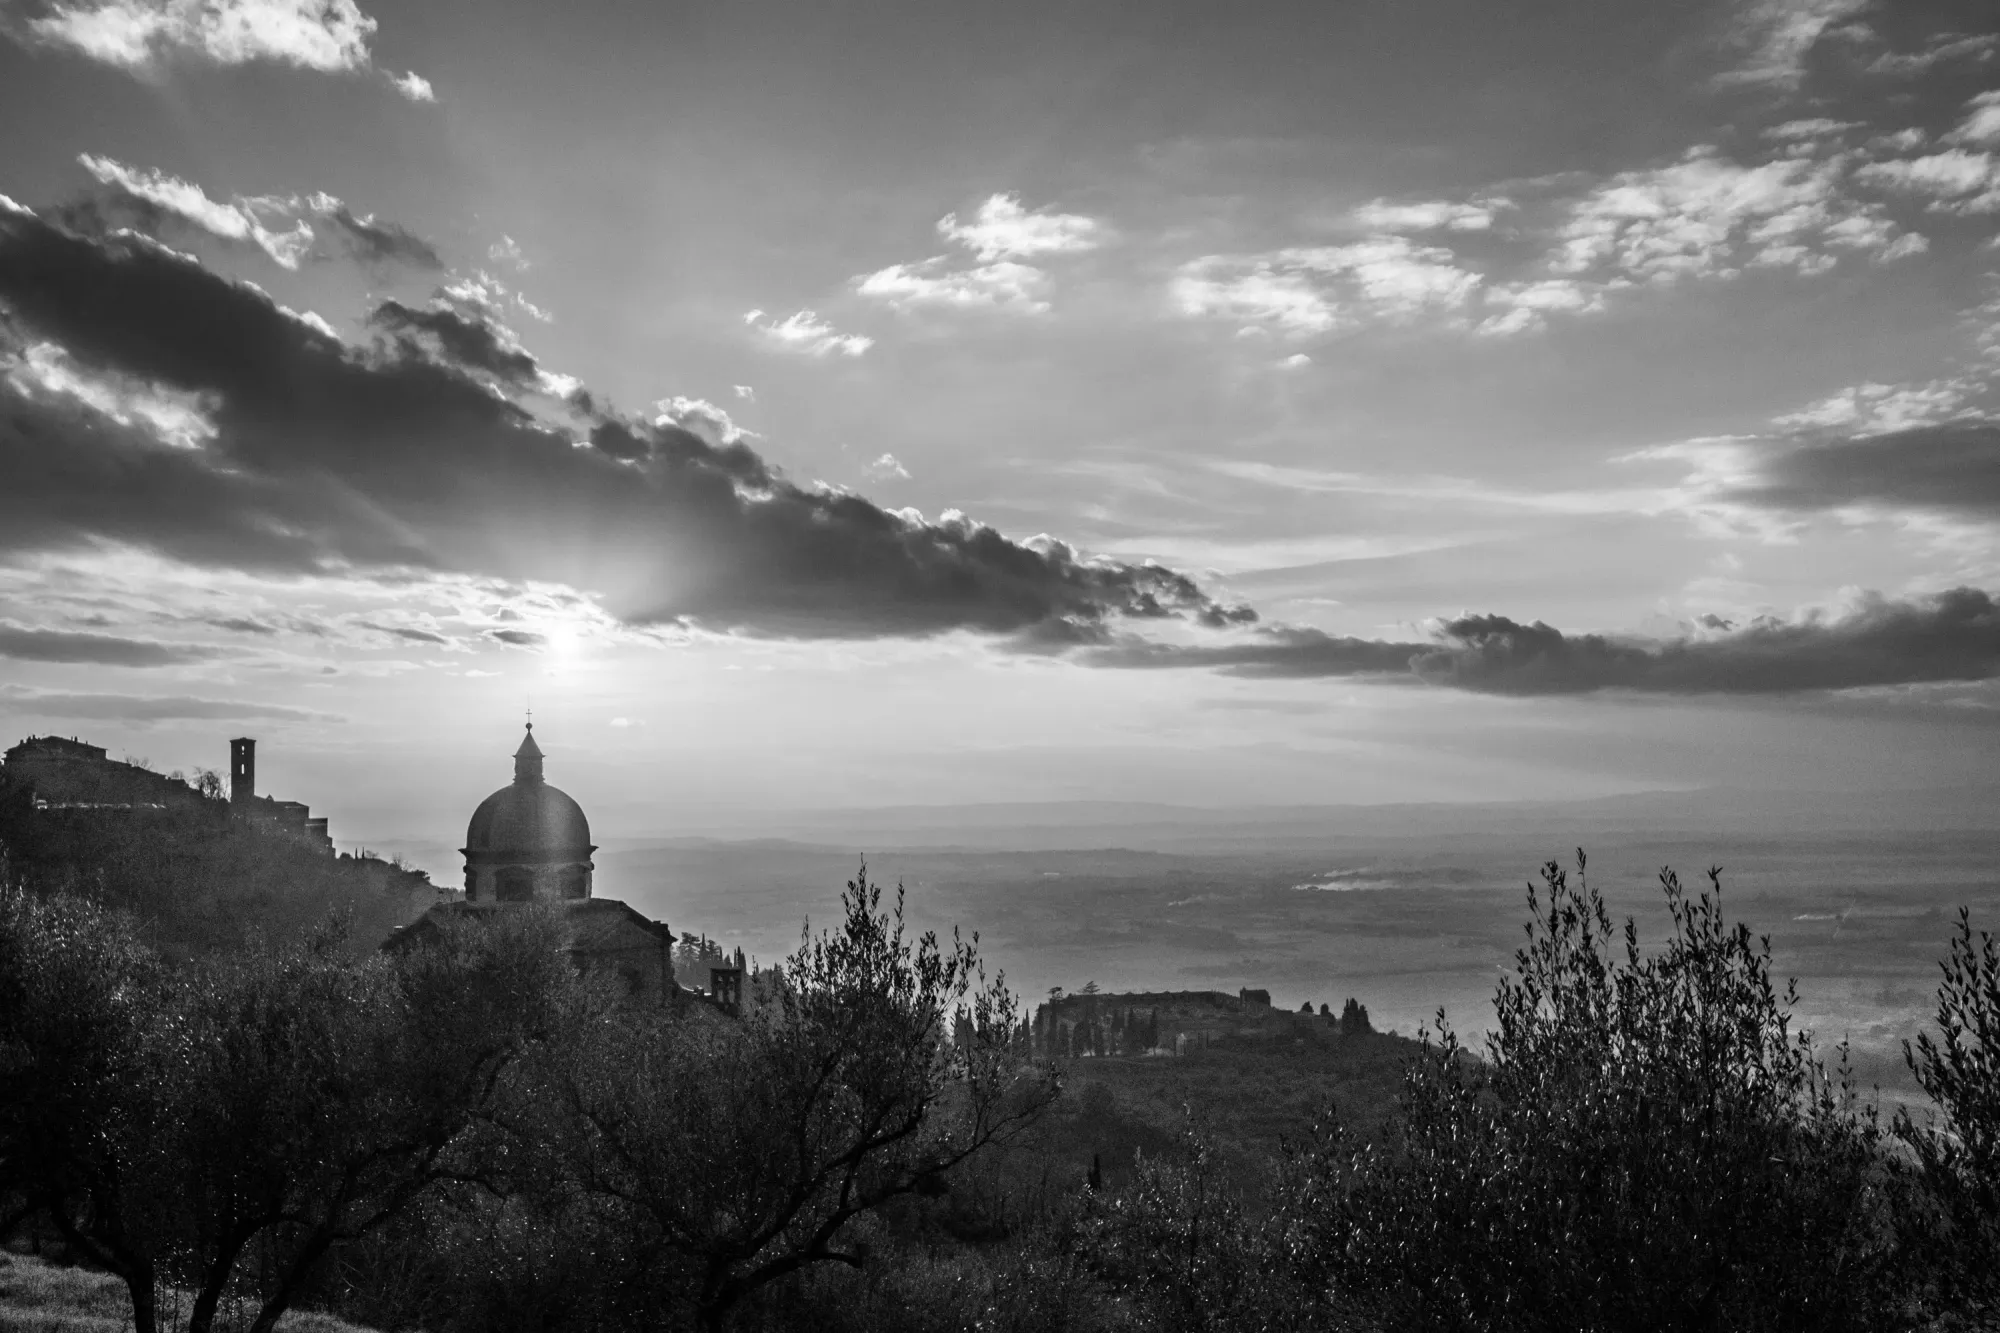 A monochromatic digital photograph of Chiesa di Santa Maria Nuova in Cortona Italy at sunset. The sky is filled with a backlit, abstract-shaped cloud.